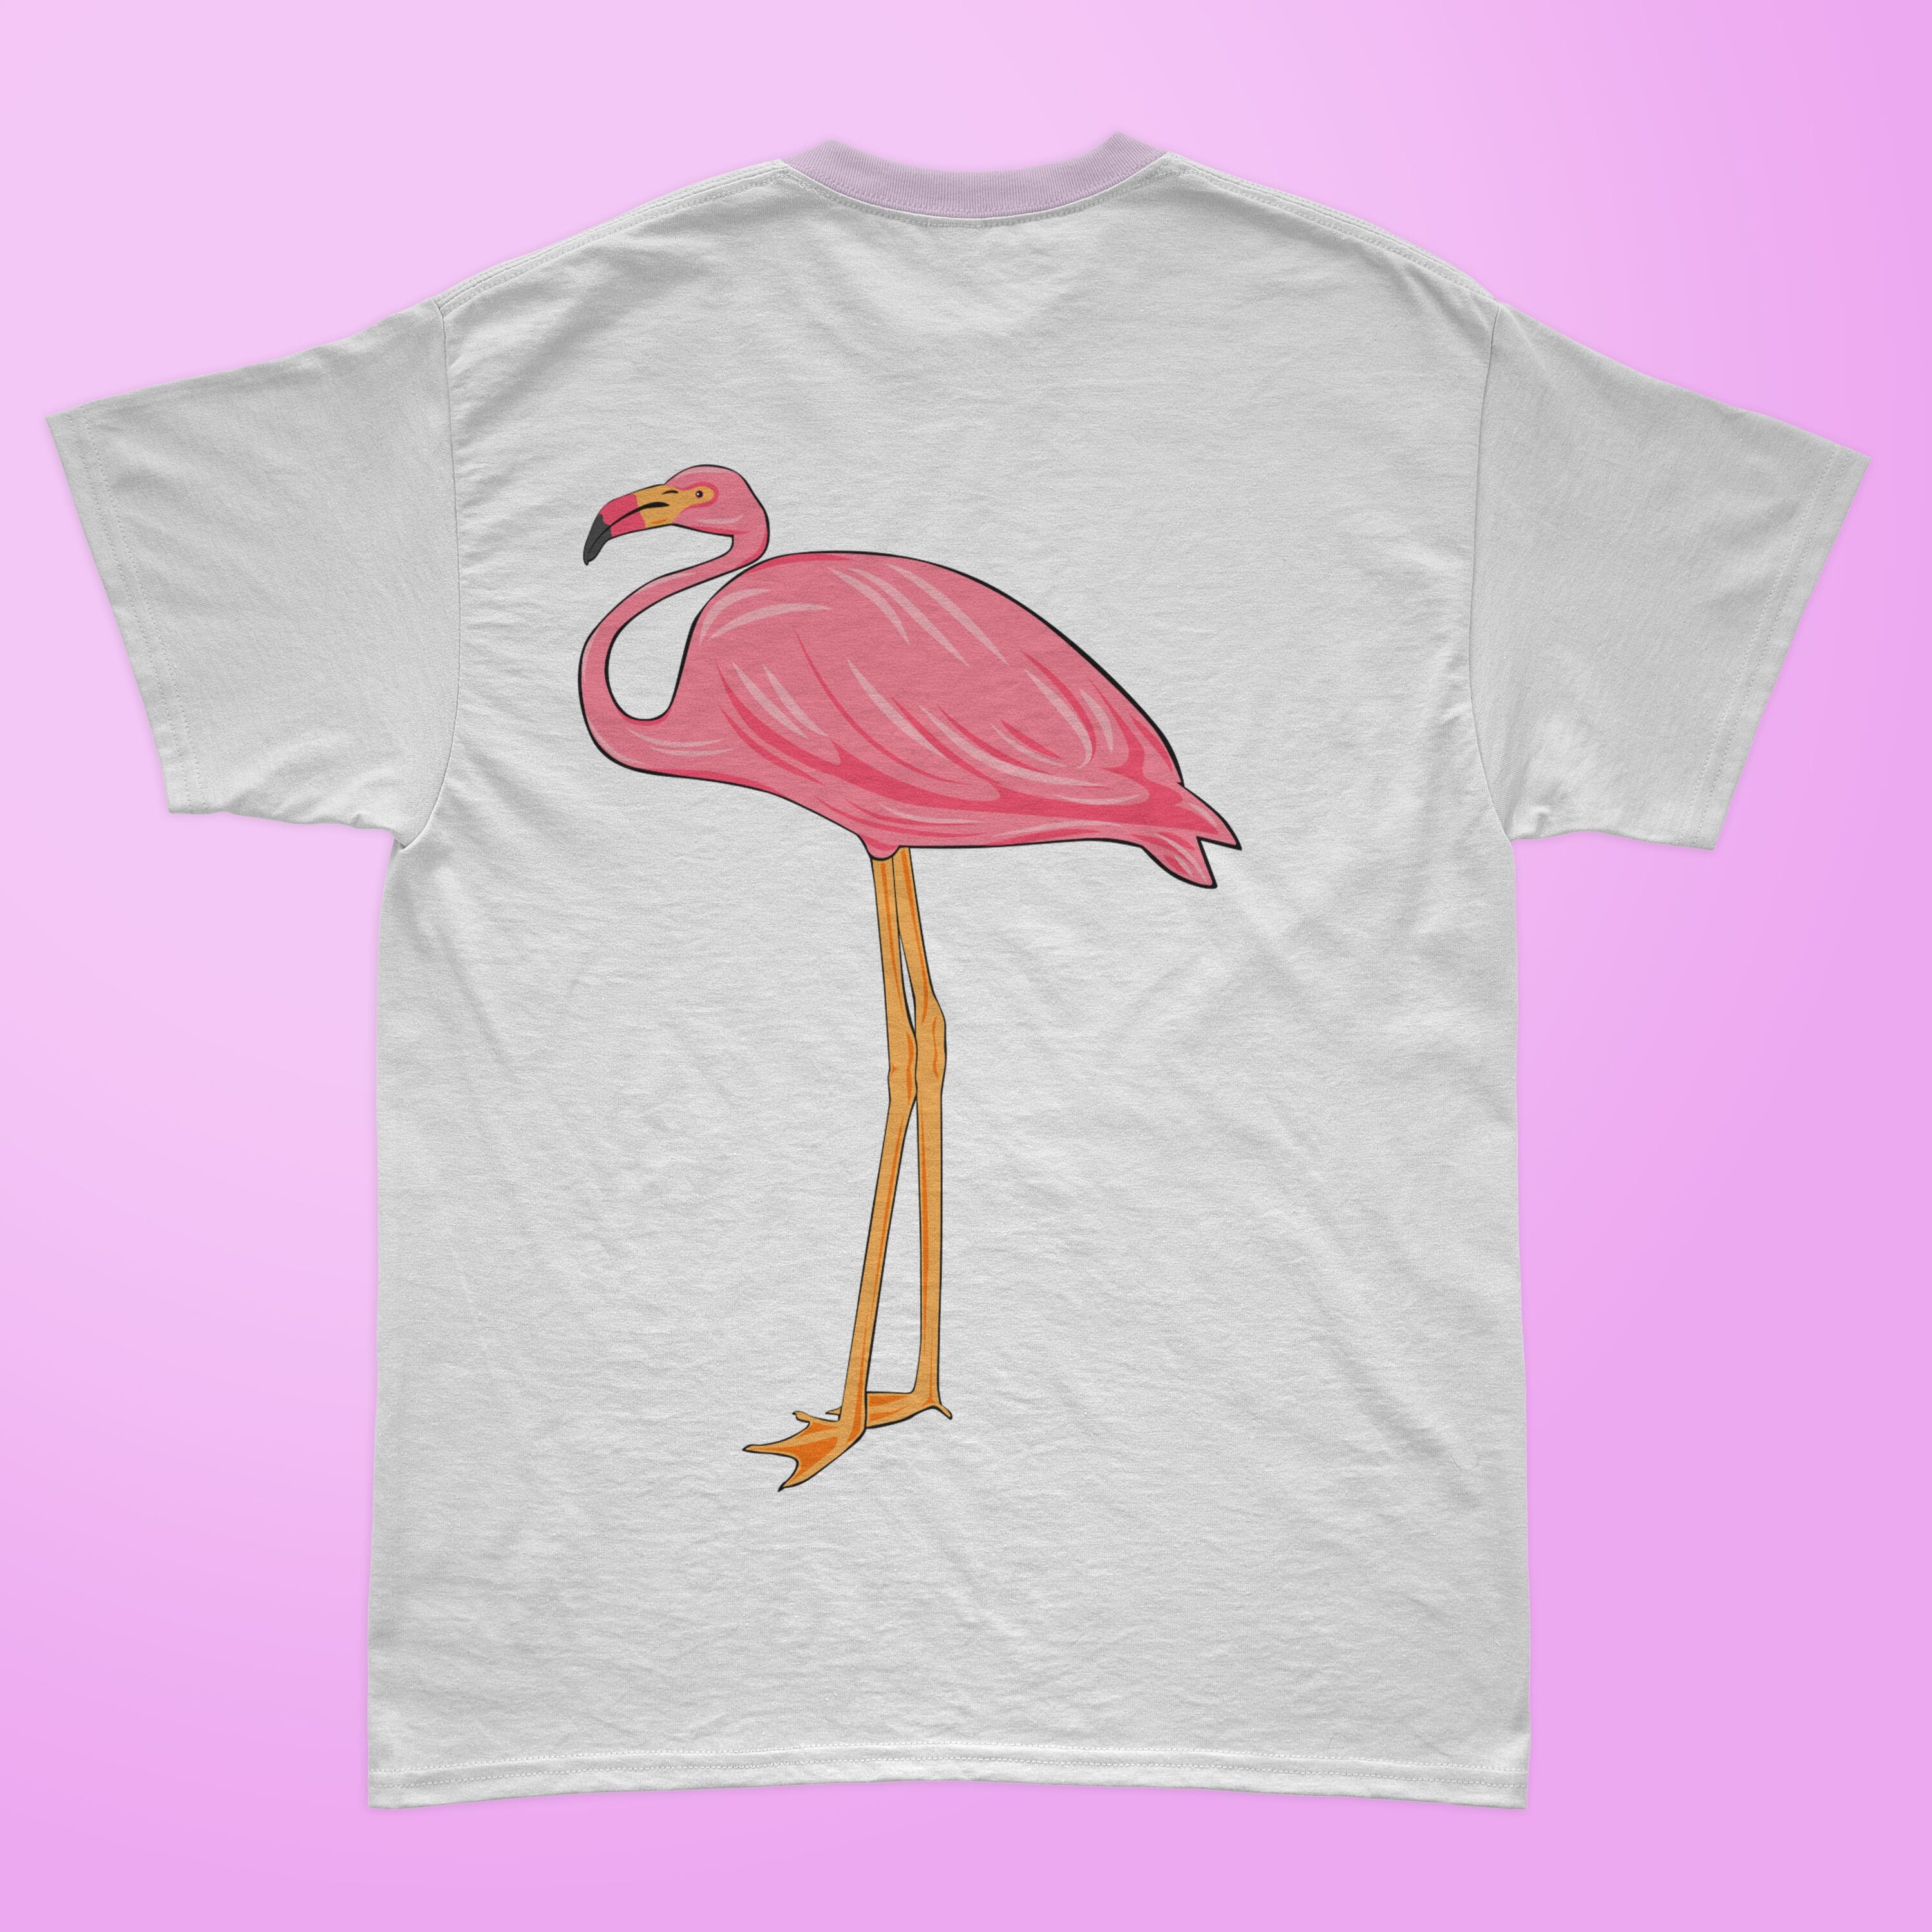 Flamingo looks angry on this white t-shirt.